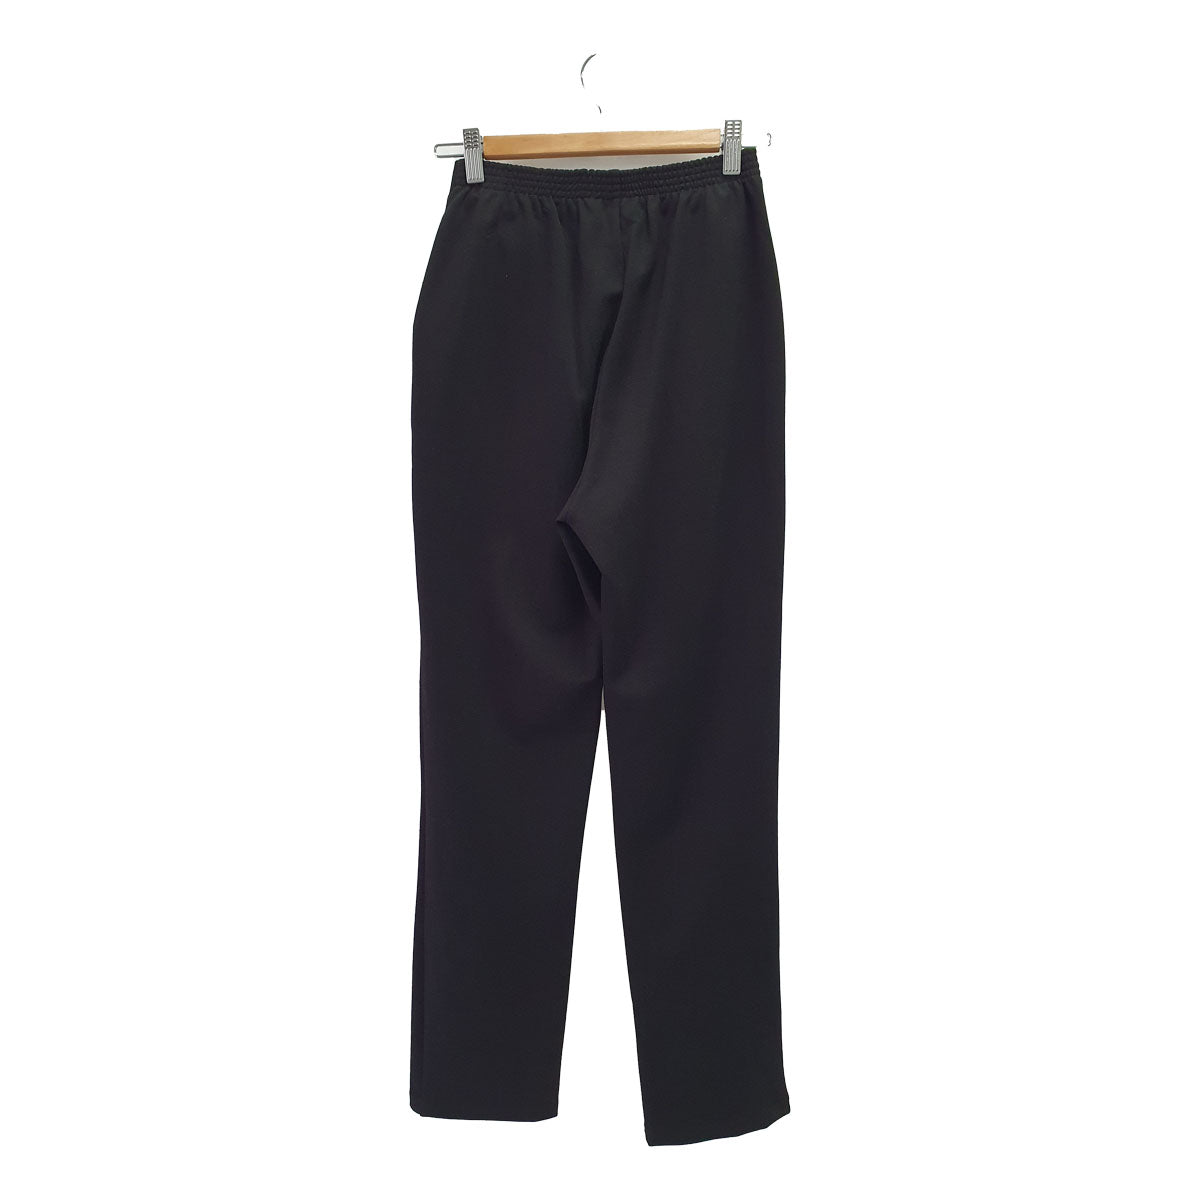 TW23 280 - Stretch Pant in black